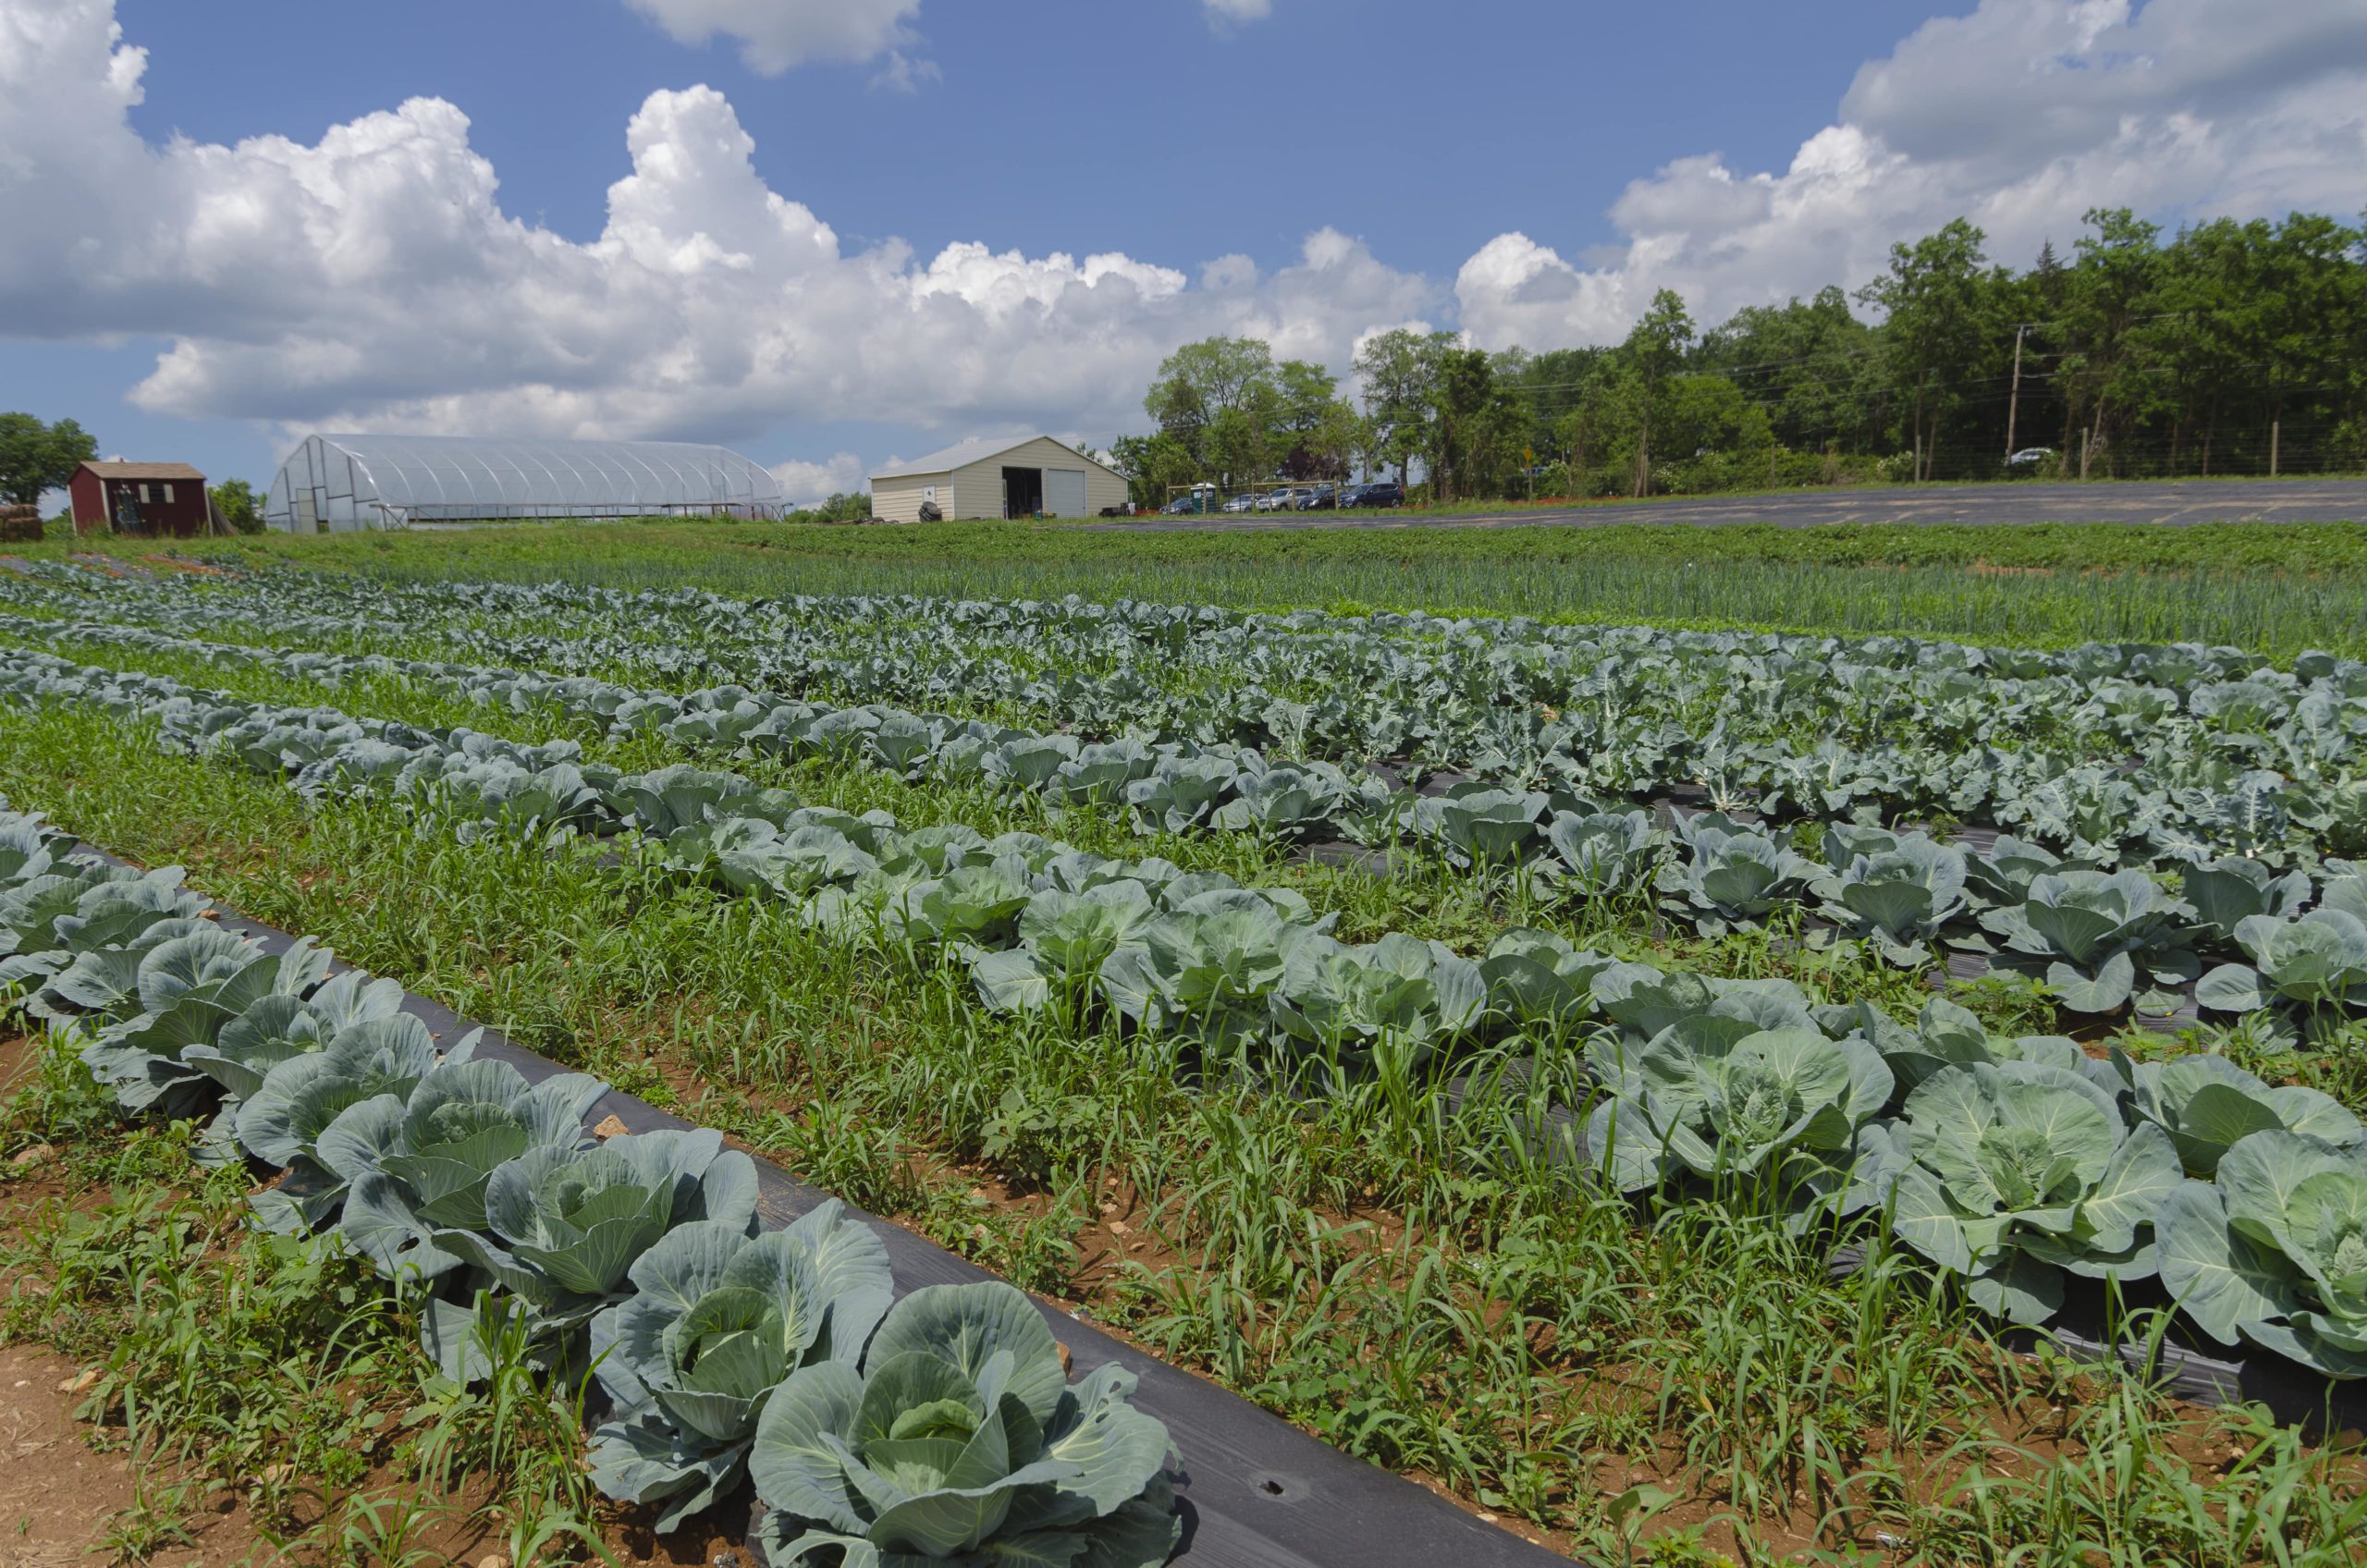 At the Fauquier Education Farm, a green field of cabbages stretches back against a blue, partly cloudy sky.